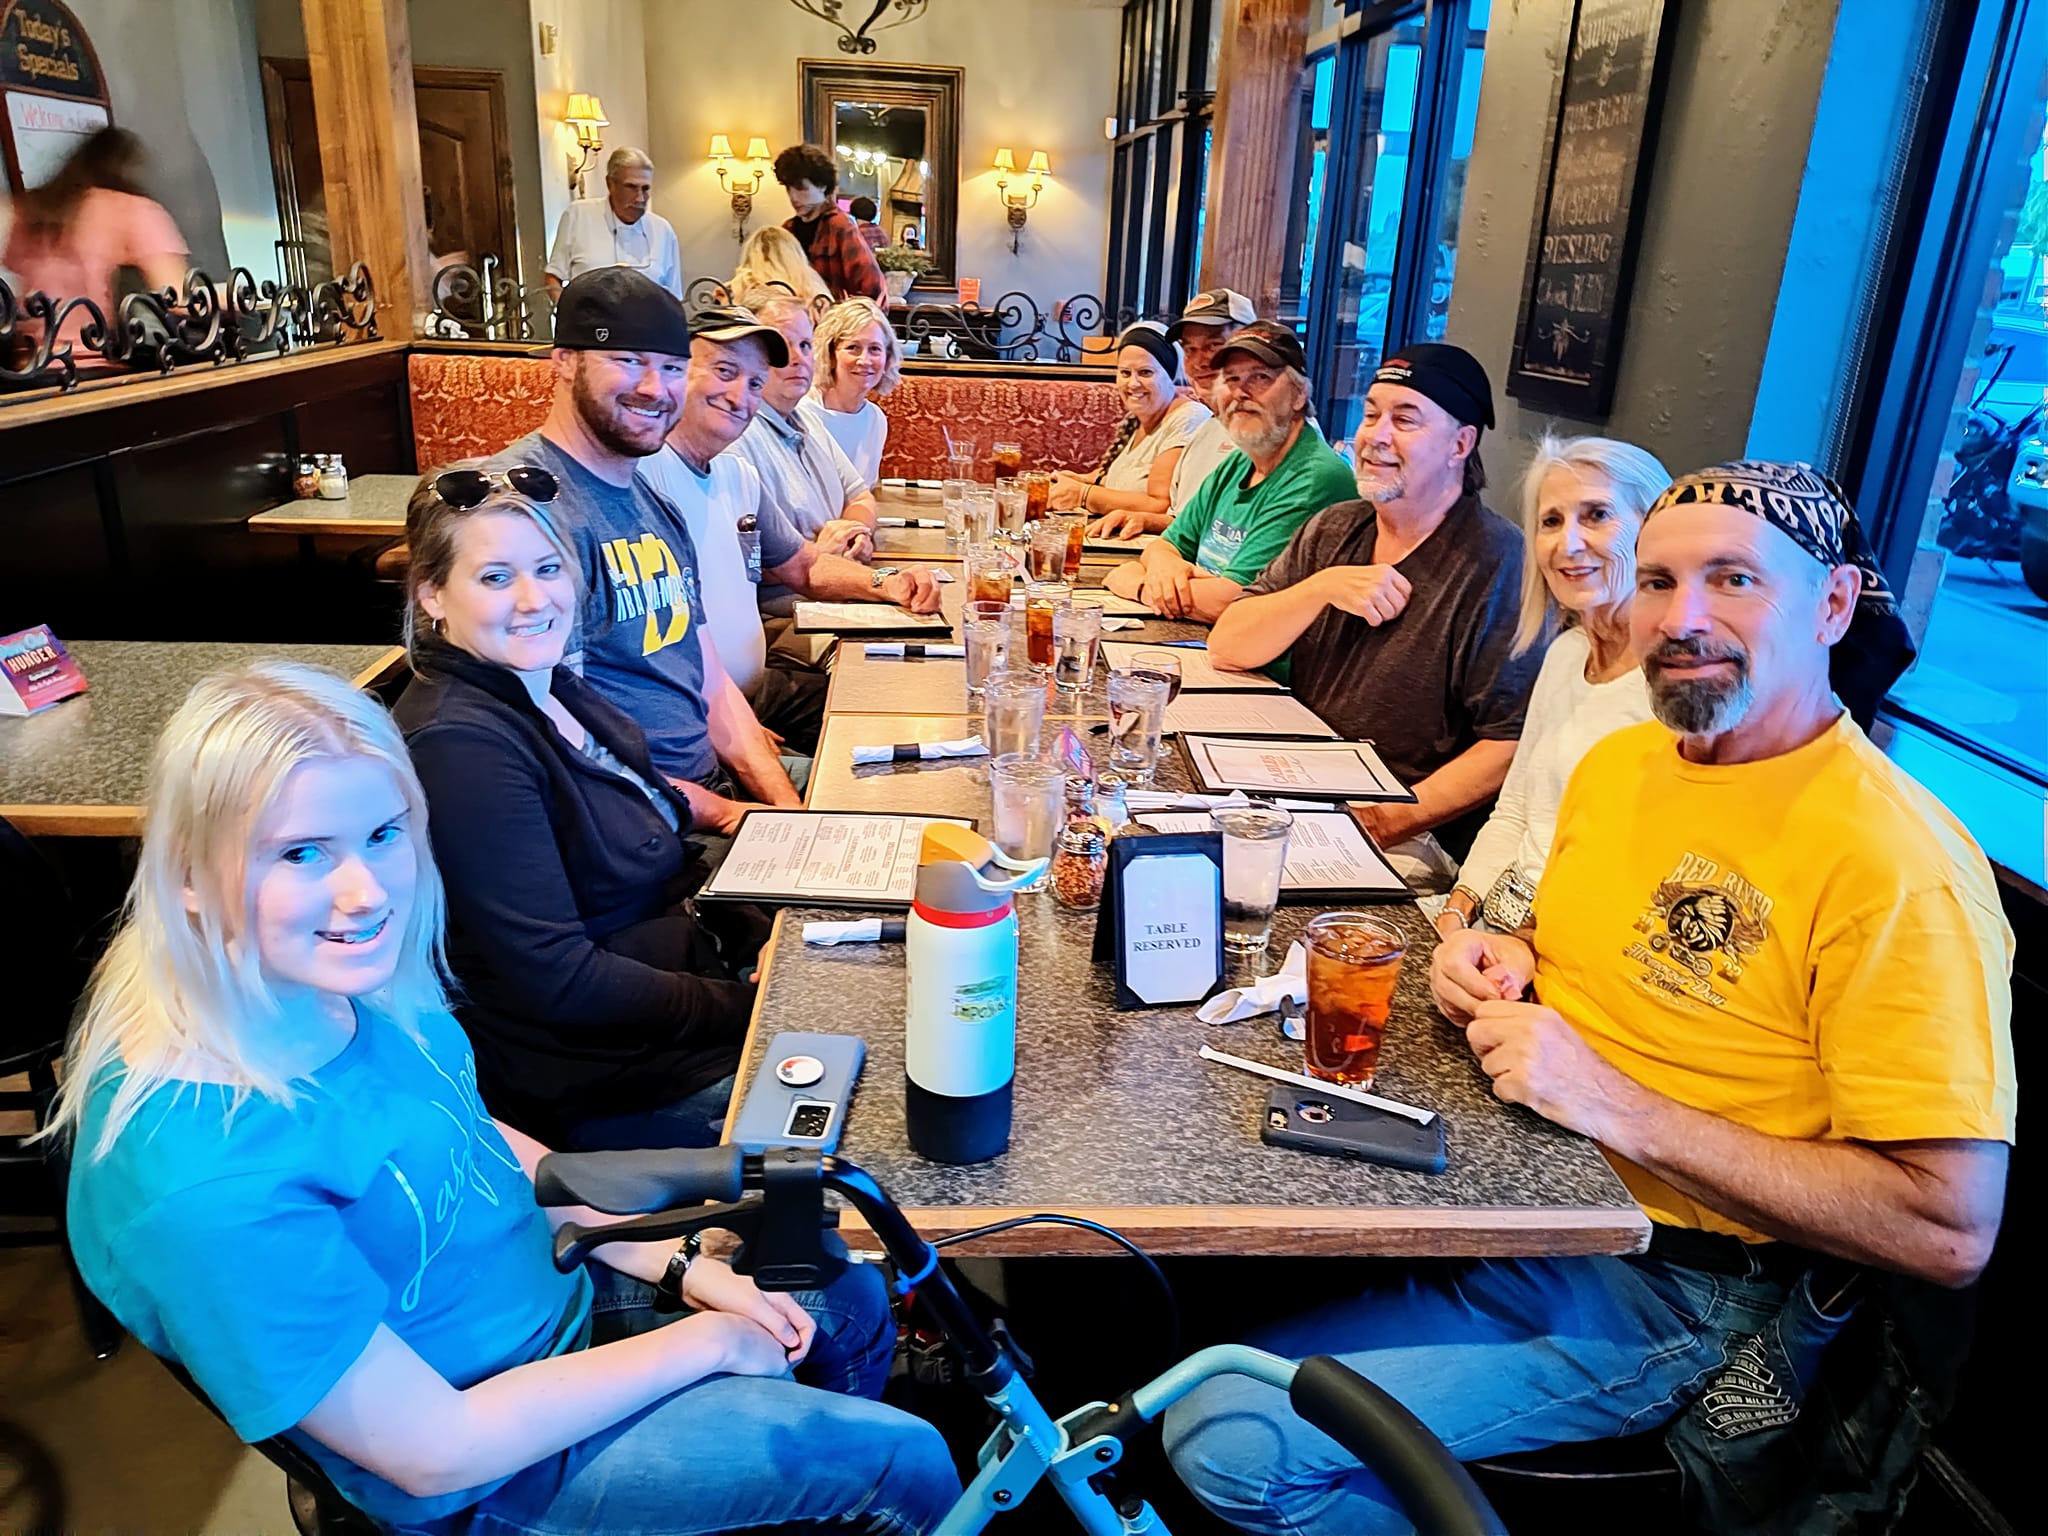 The Northern Colorado IMRG enjoyed an evening at Cables Pub & Grill